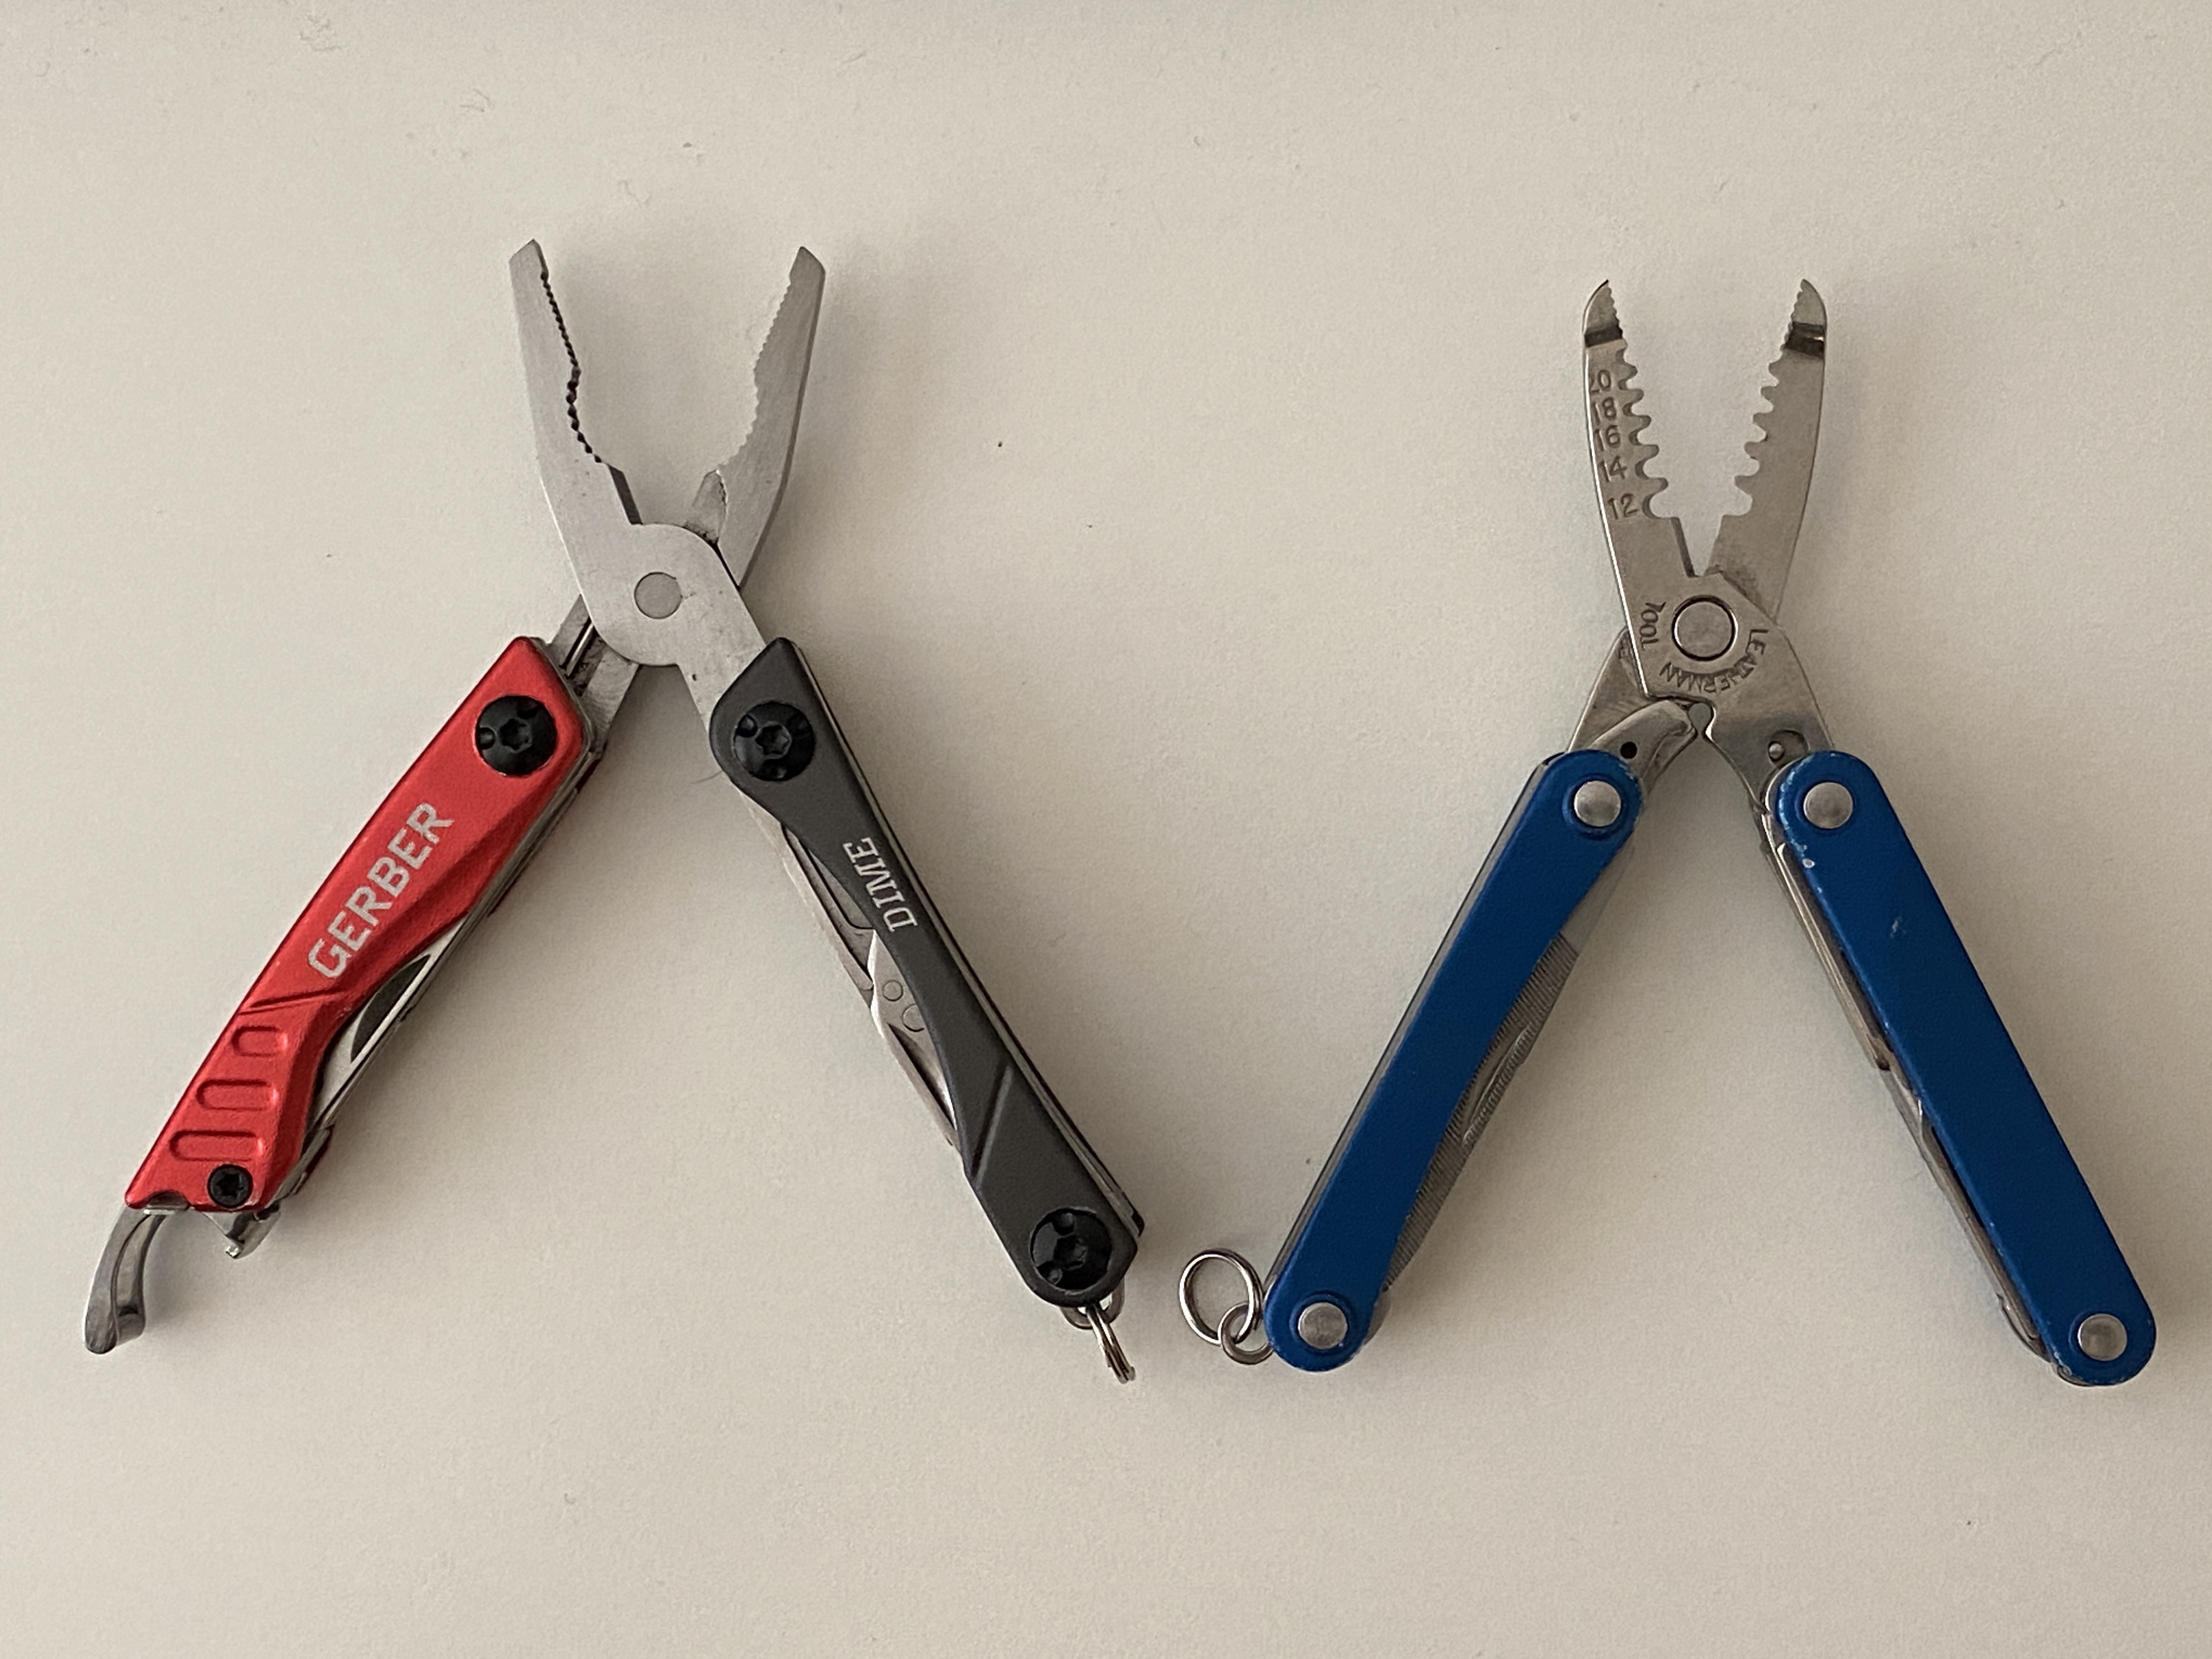 AD6DM Dennis on Twitter: "The #Leatherman Squirt is a great #hamradio tiny #EDC multitool, but it's no longer produced. Since I use it a lot at home on the workbench I